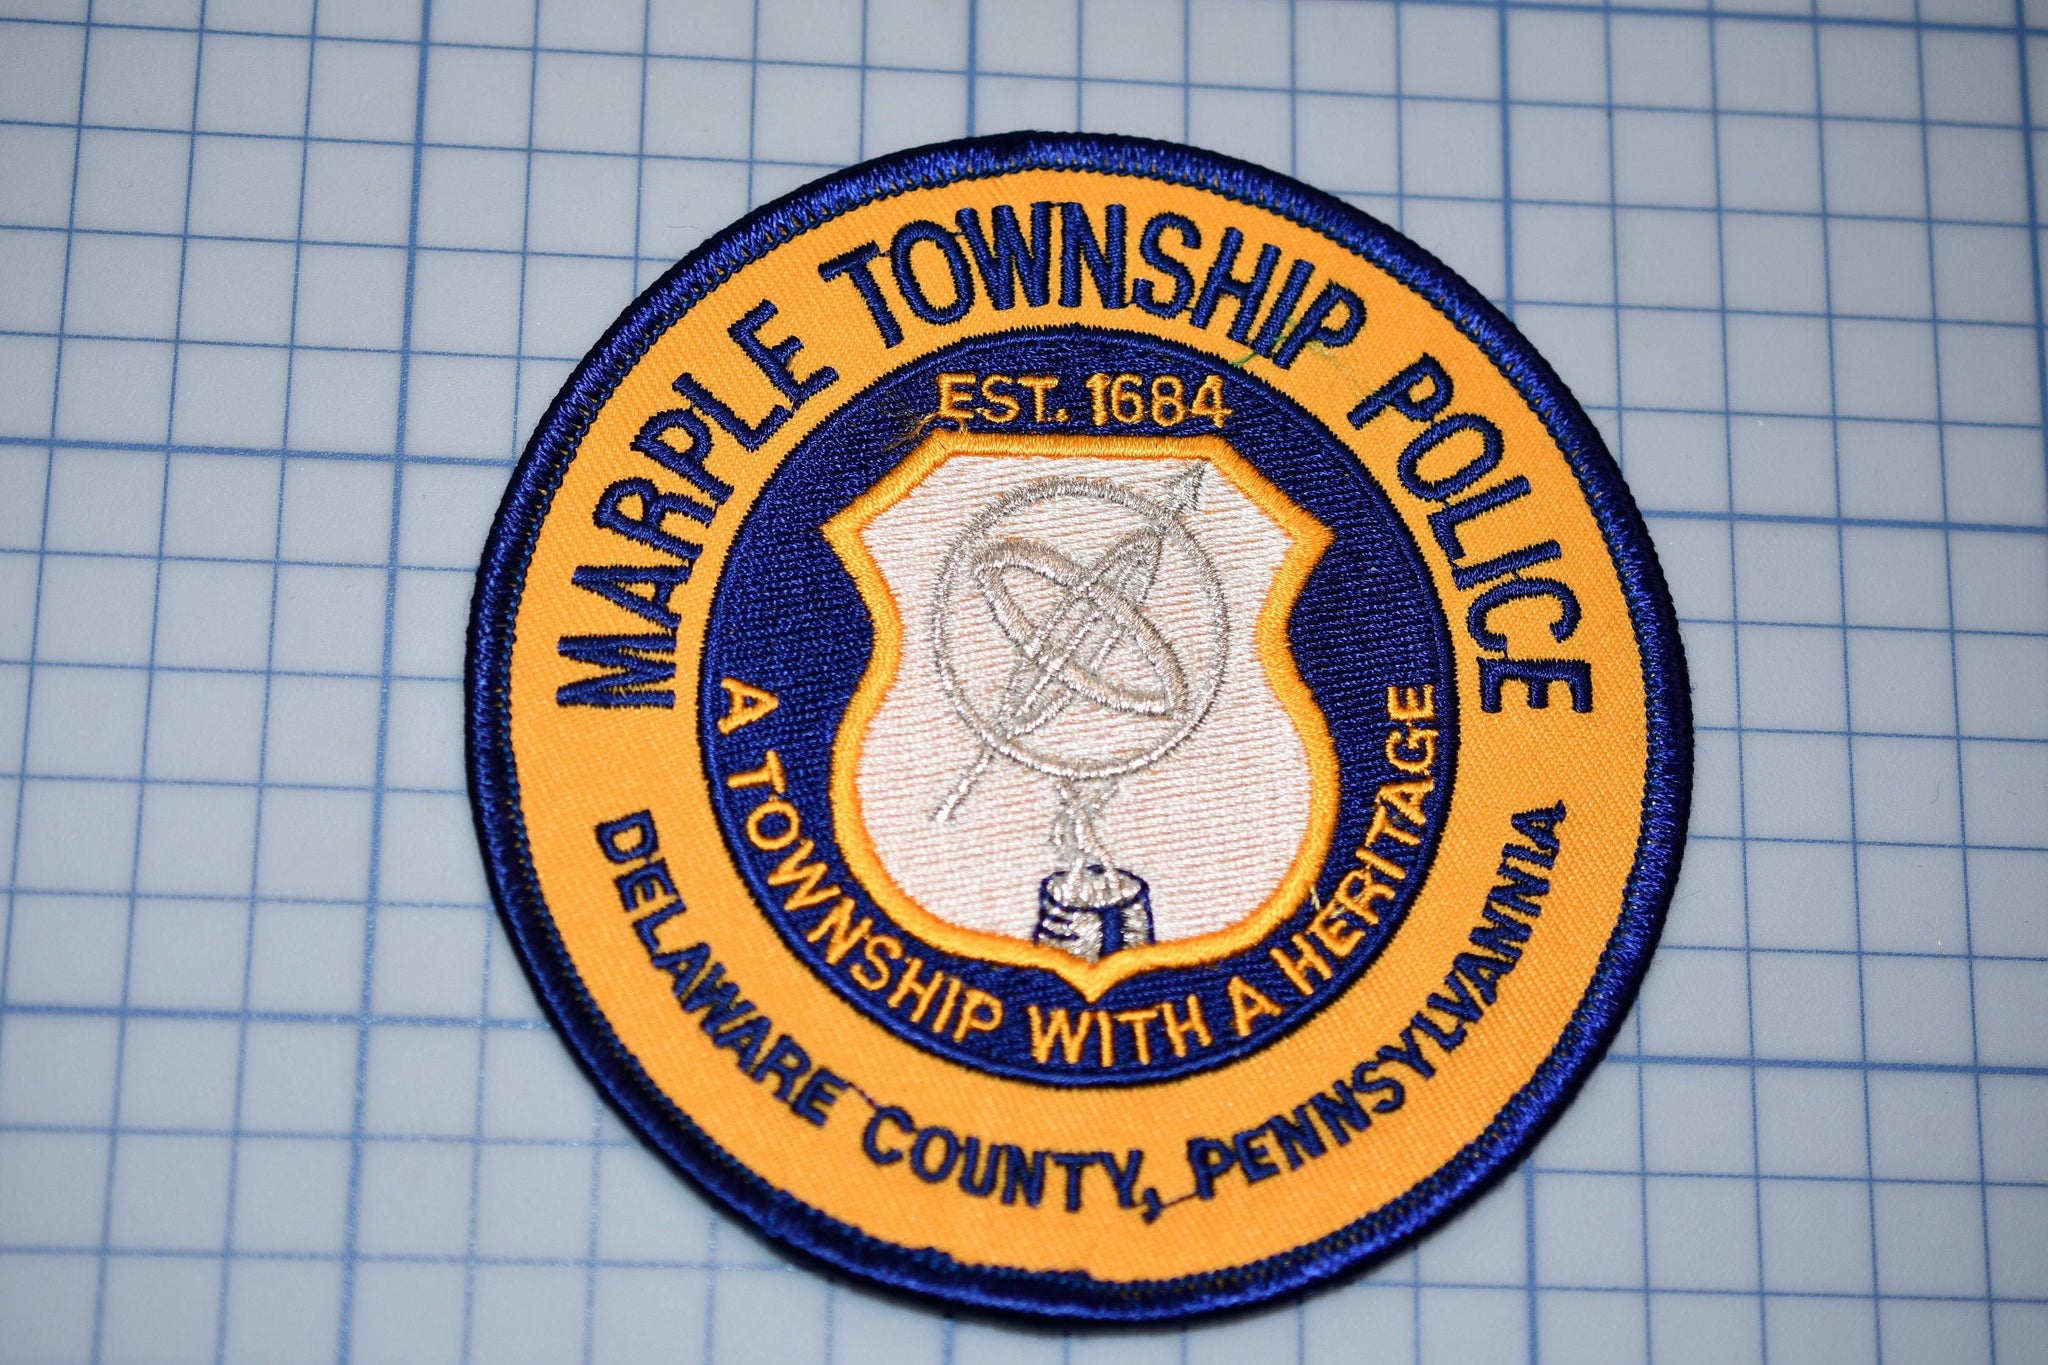 Maple Township Pennsylvania Police Patch (B23-336)